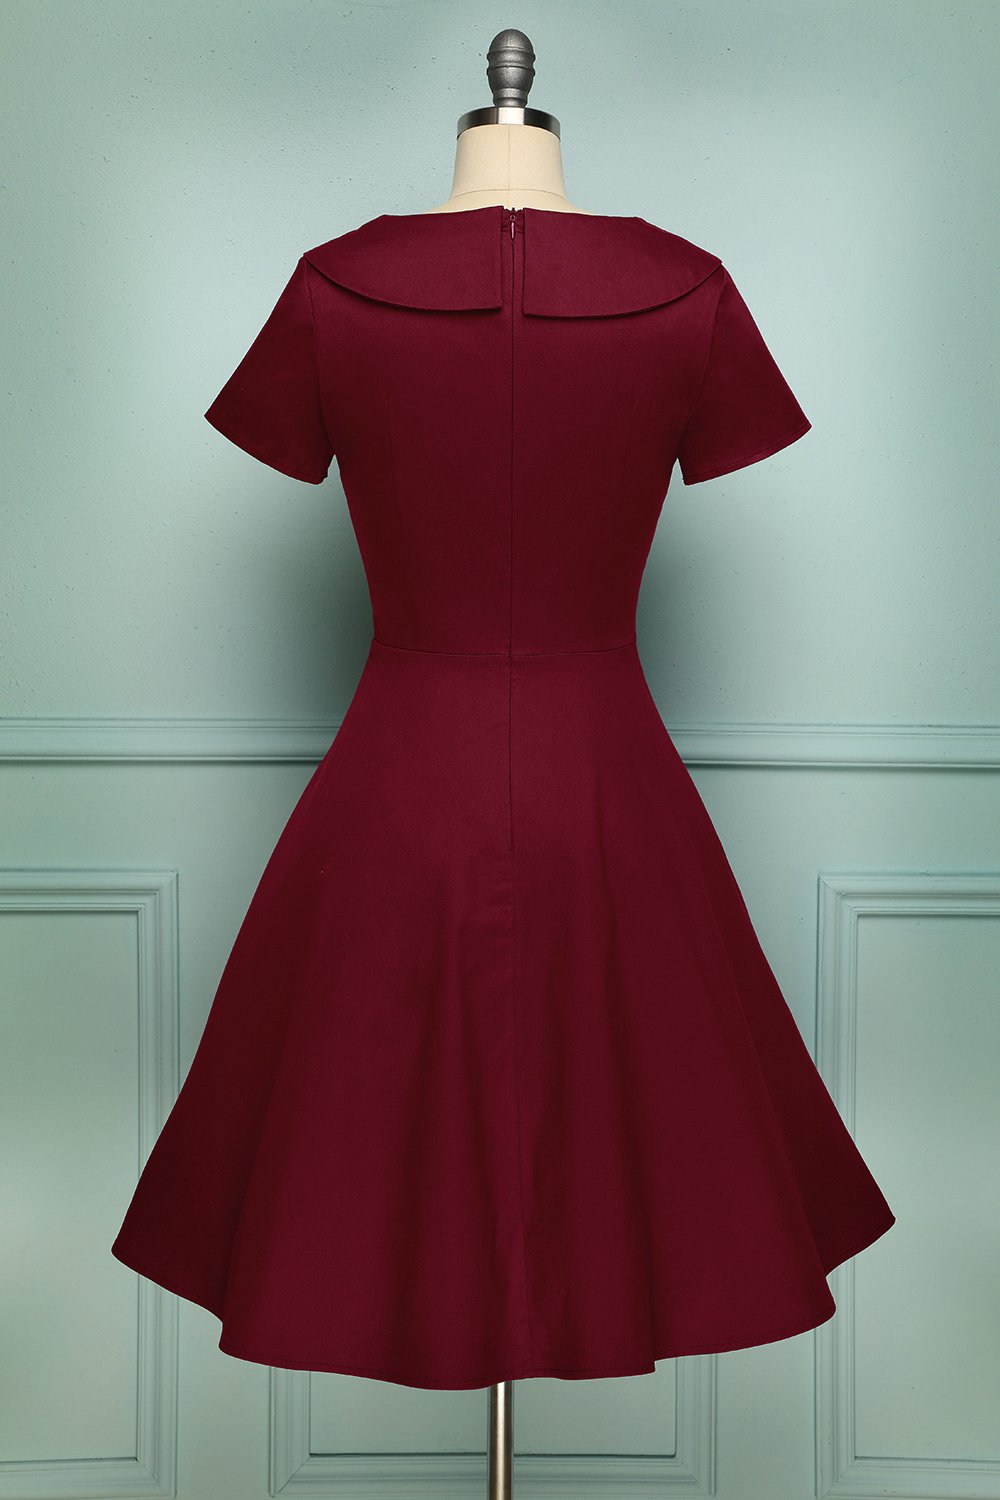 Burgundy Swing 1950s Dress Peter Pans Collar A Line Button Up Pin Up Dress With Sleeves